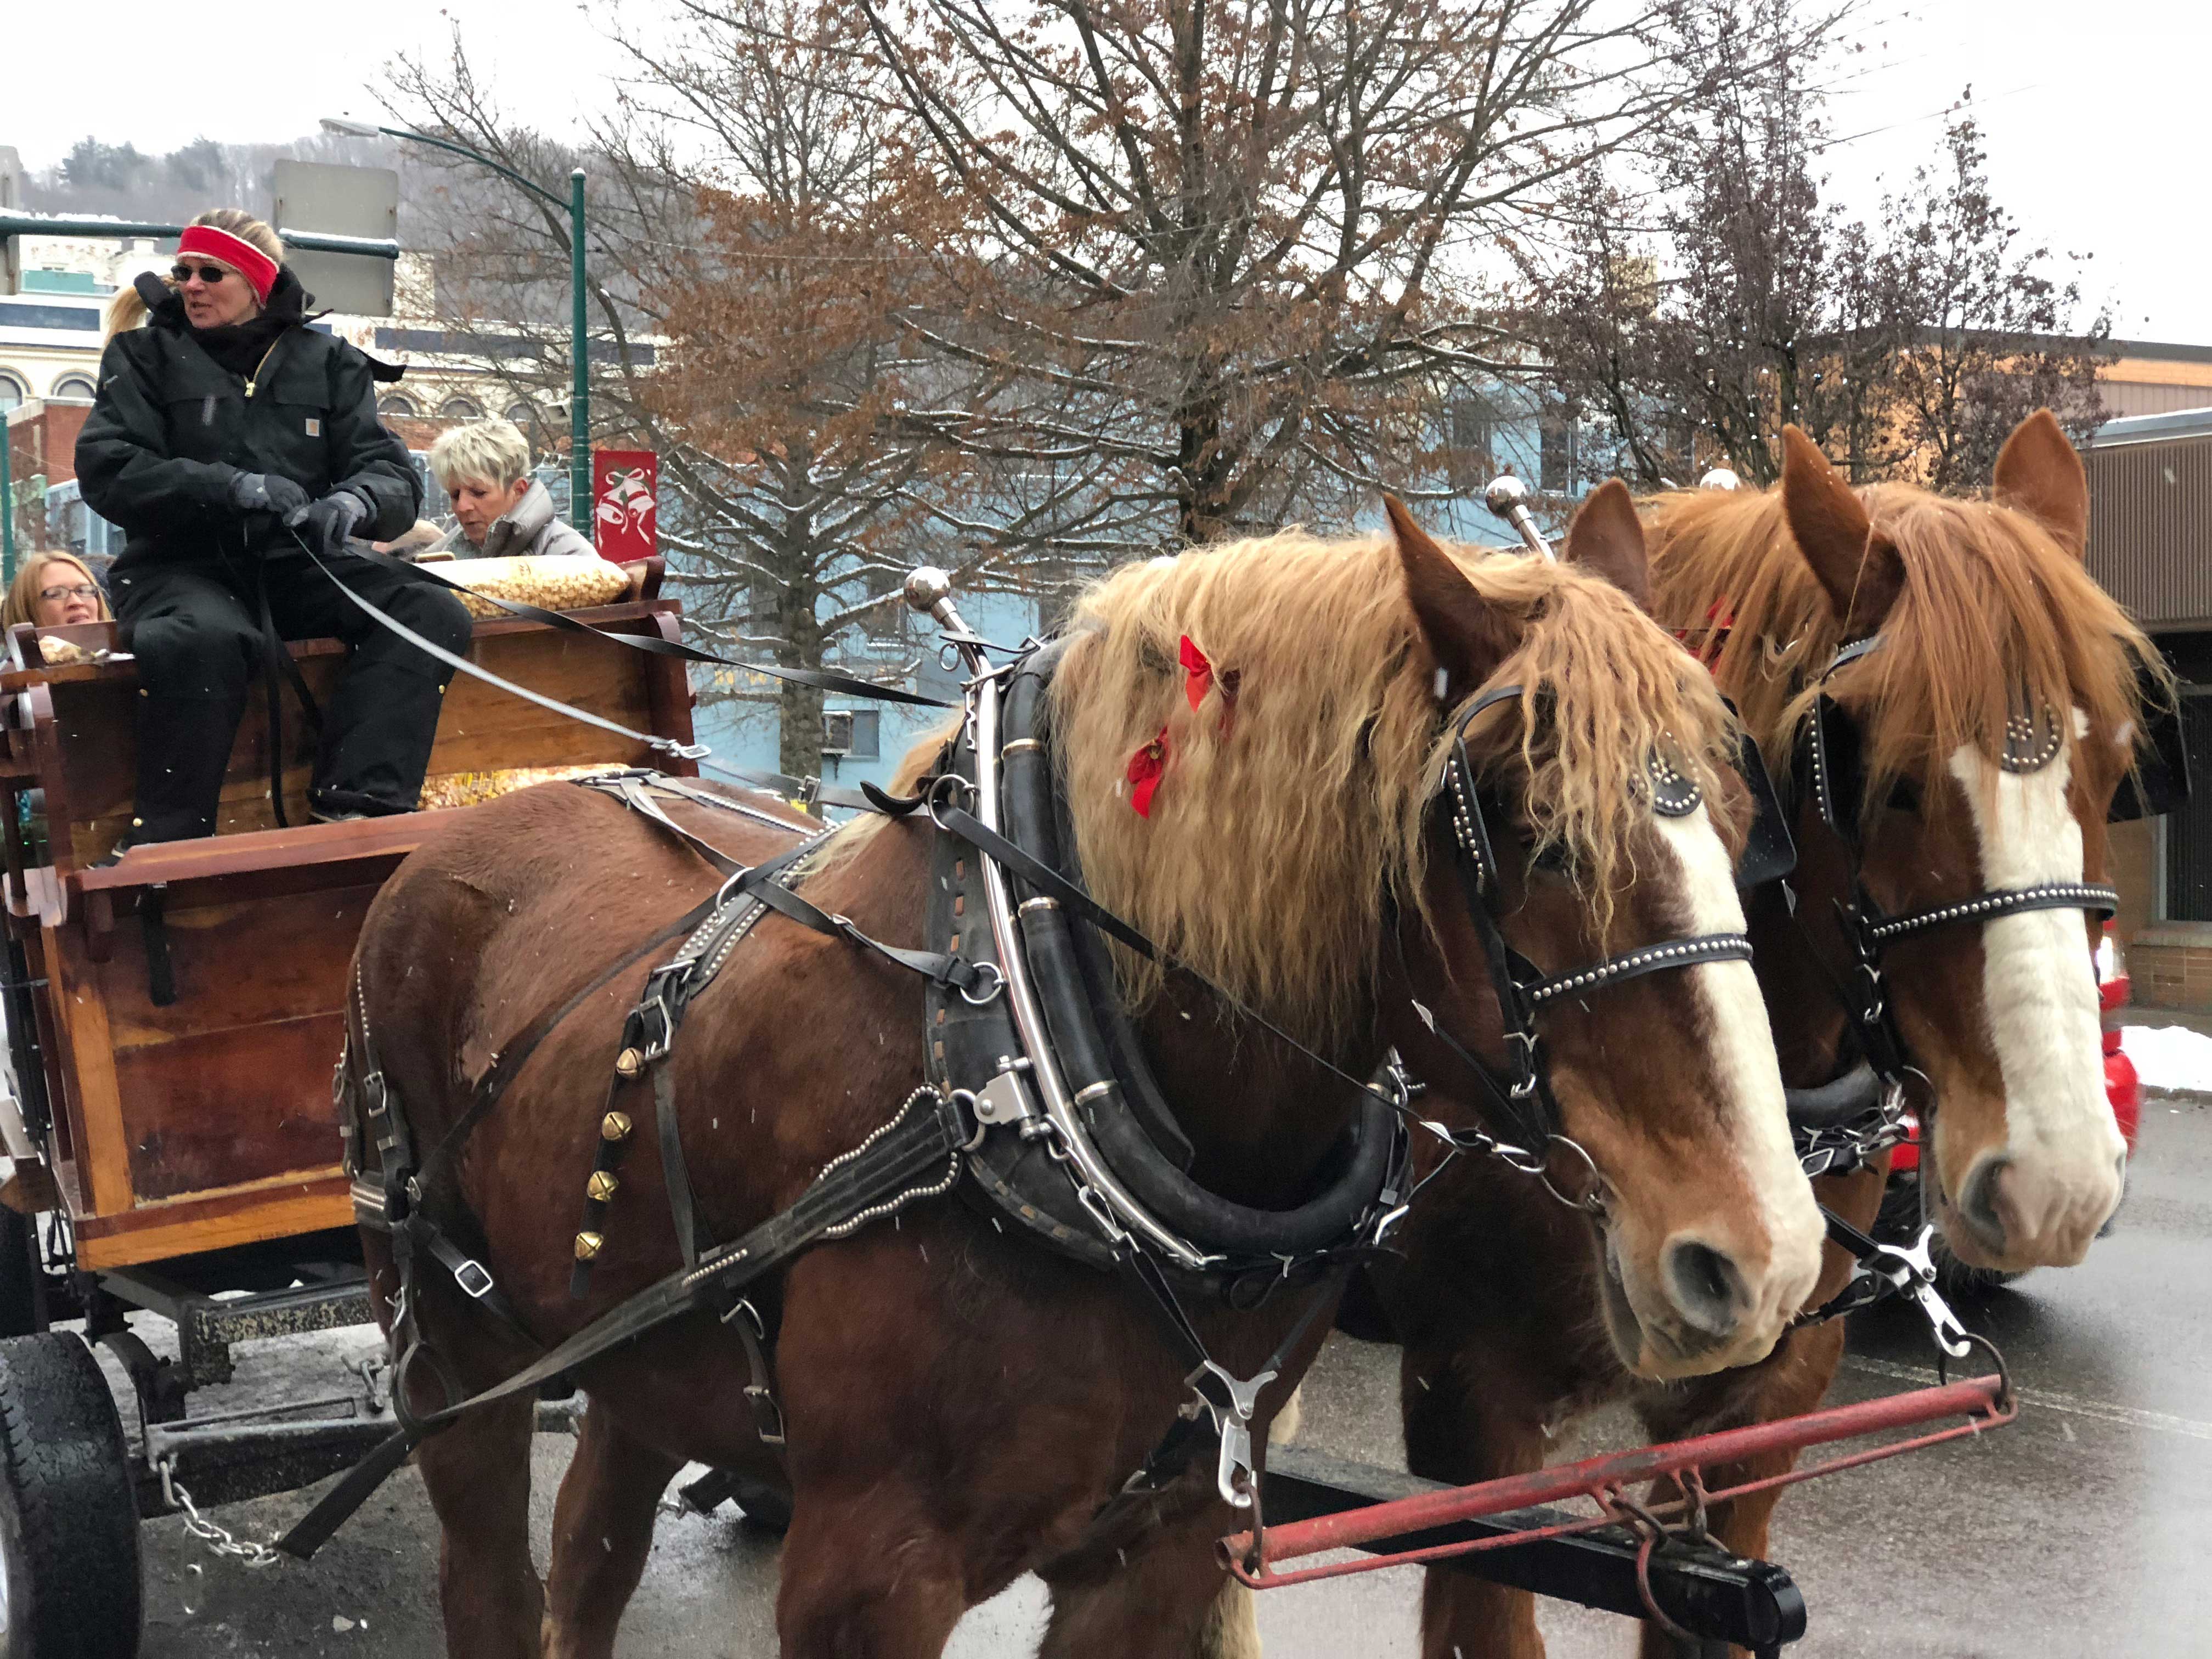 Enjoy an old fashioned carriage ride during Bradford's Downtown Old Fashioned Christmas Event.